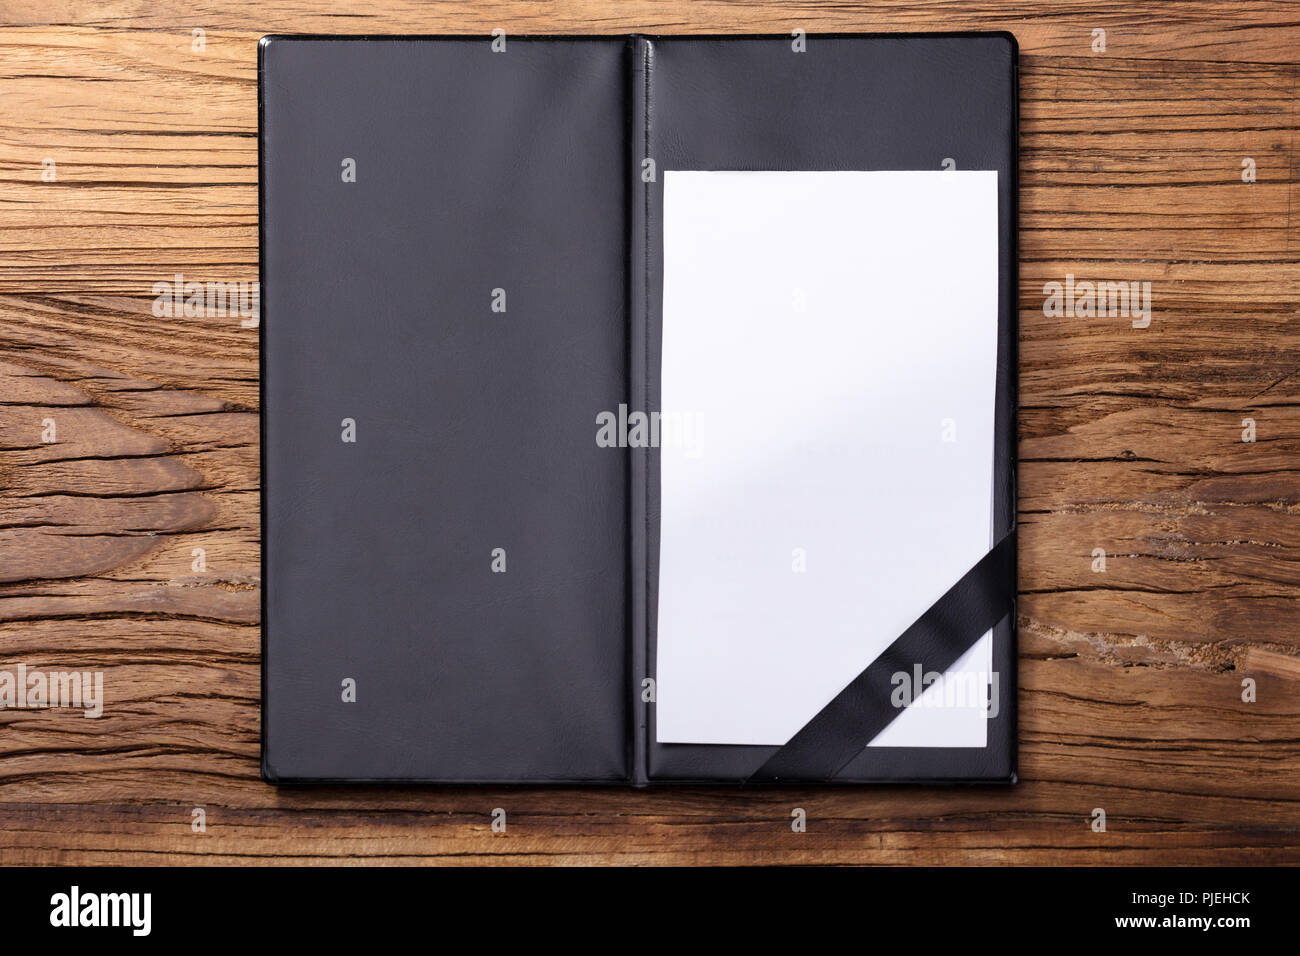 Overhead View Of Blank Empty White Paper In Black Leather Folder On Wooden Table Stock Photo